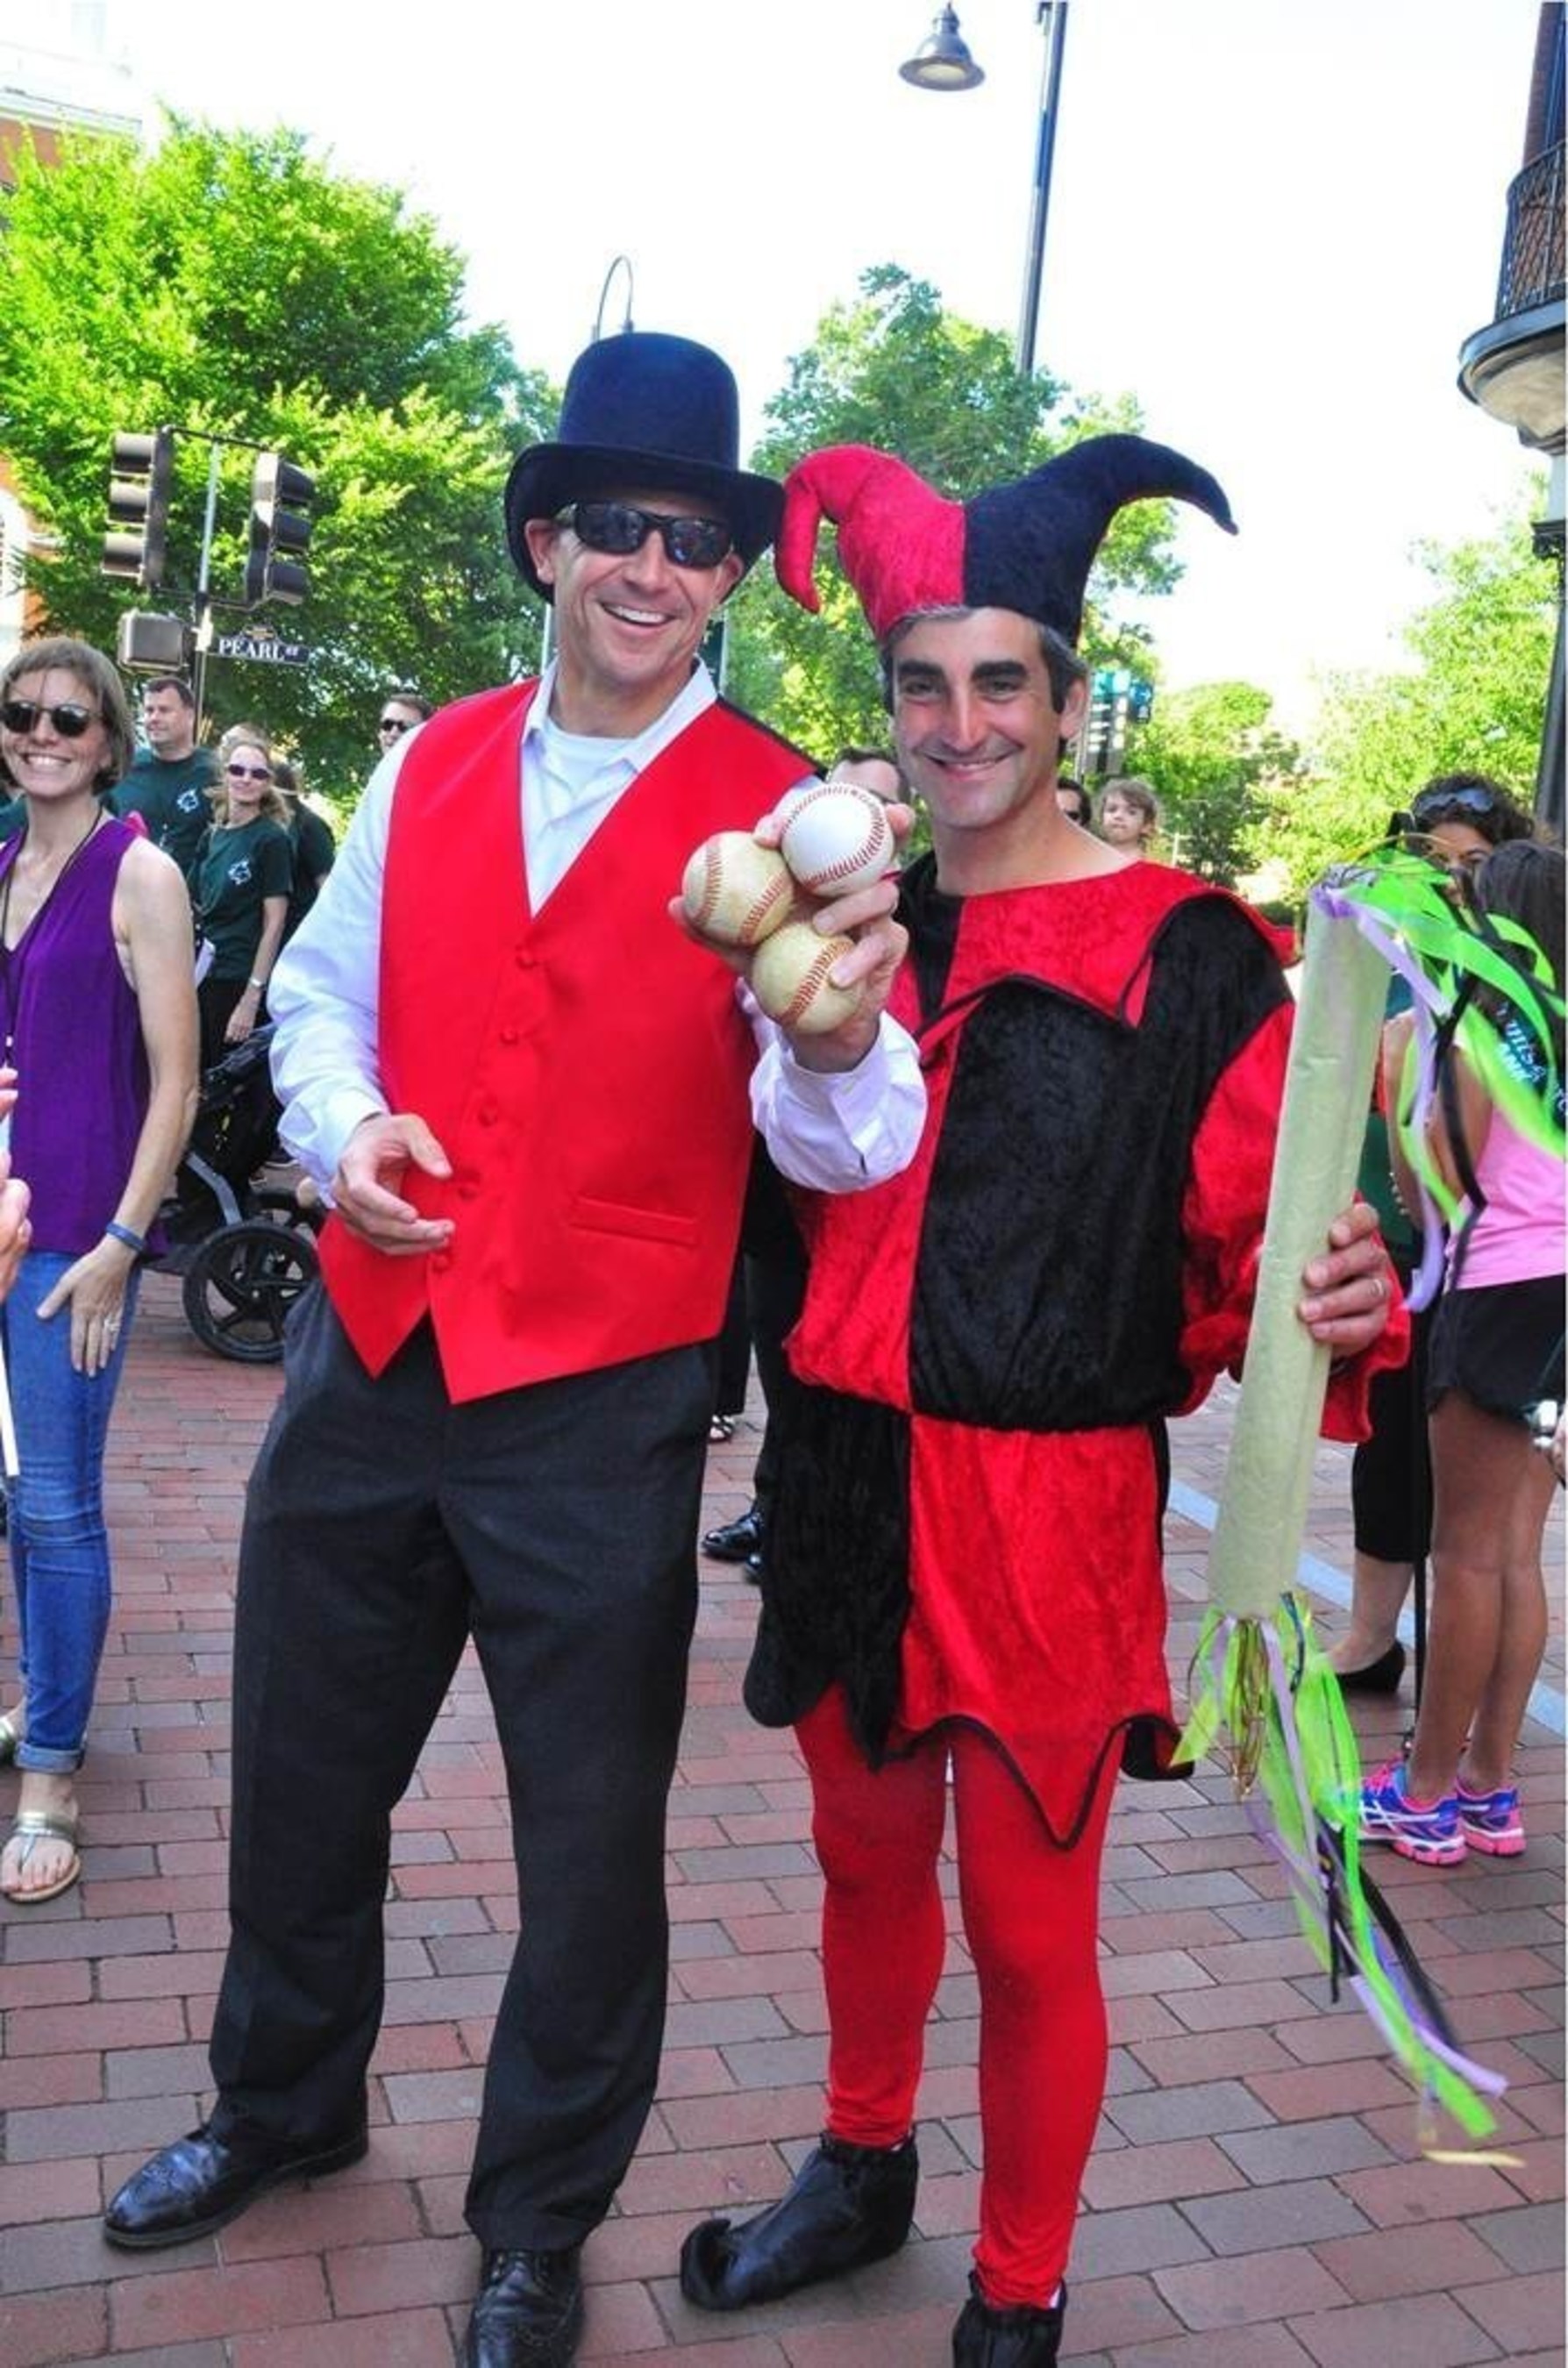 Merchants Bank's President and CEO Geoffrey Hesslink and Burlington's Mayor Miro Weinberger at the Festival of Fools Parade.Photo Credit: Melani Broe